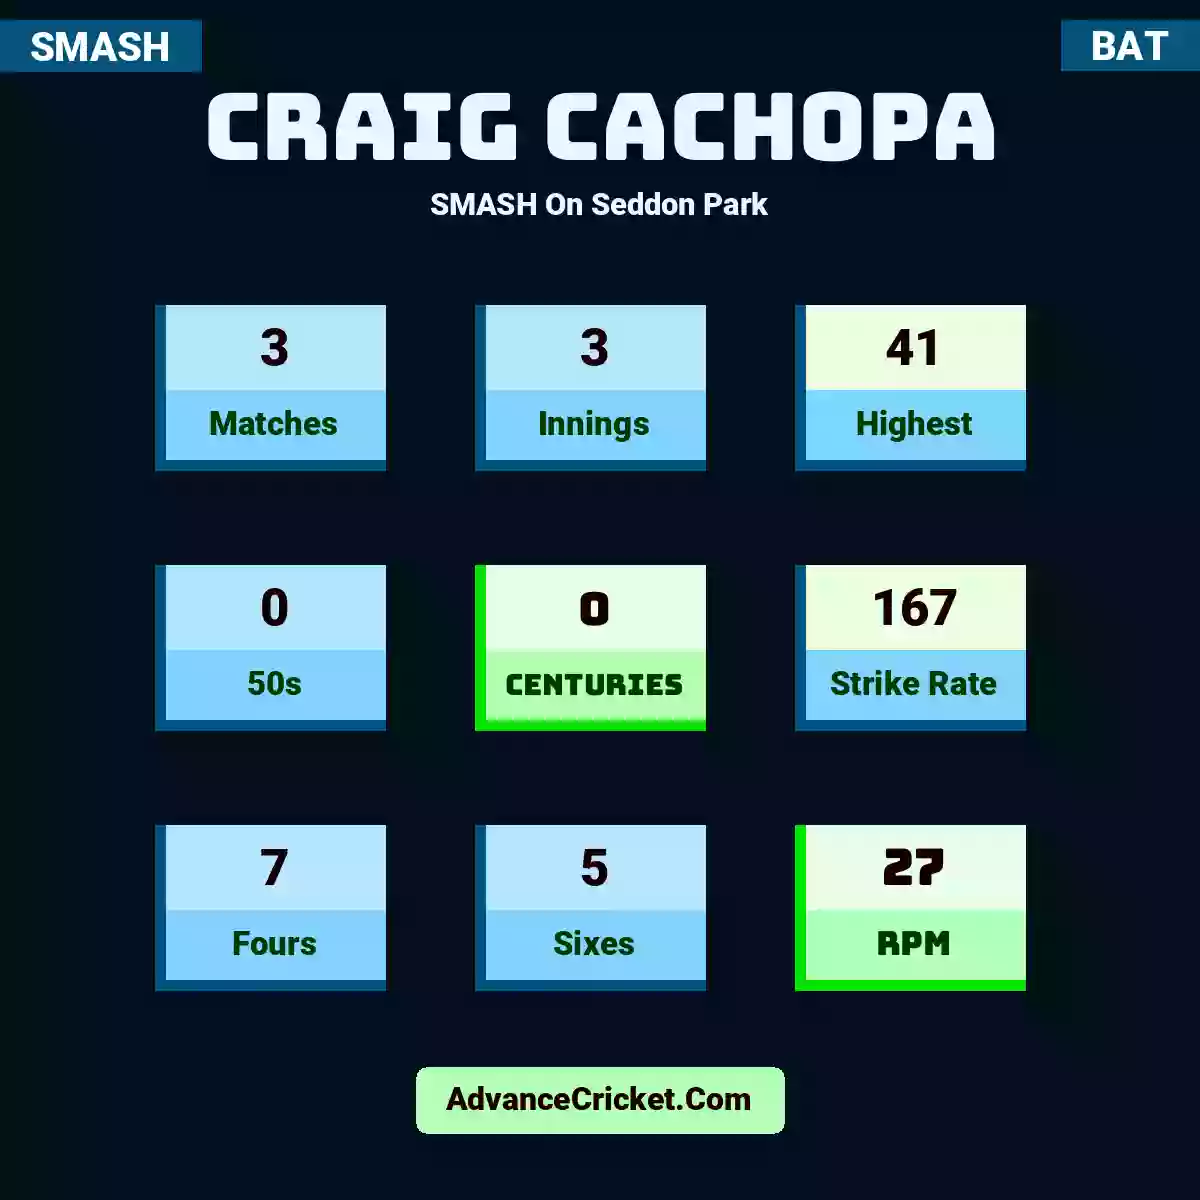 Craig Cachopa SMASH  On Seddon Park, Craig Cachopa played 3 matches, scored 41 runs as highest, 0 half-centuries, and 0 centuries, with a strike rate of 167. C.Cachopa hit 7 fours and 5 sixes, with an RPM of 27.